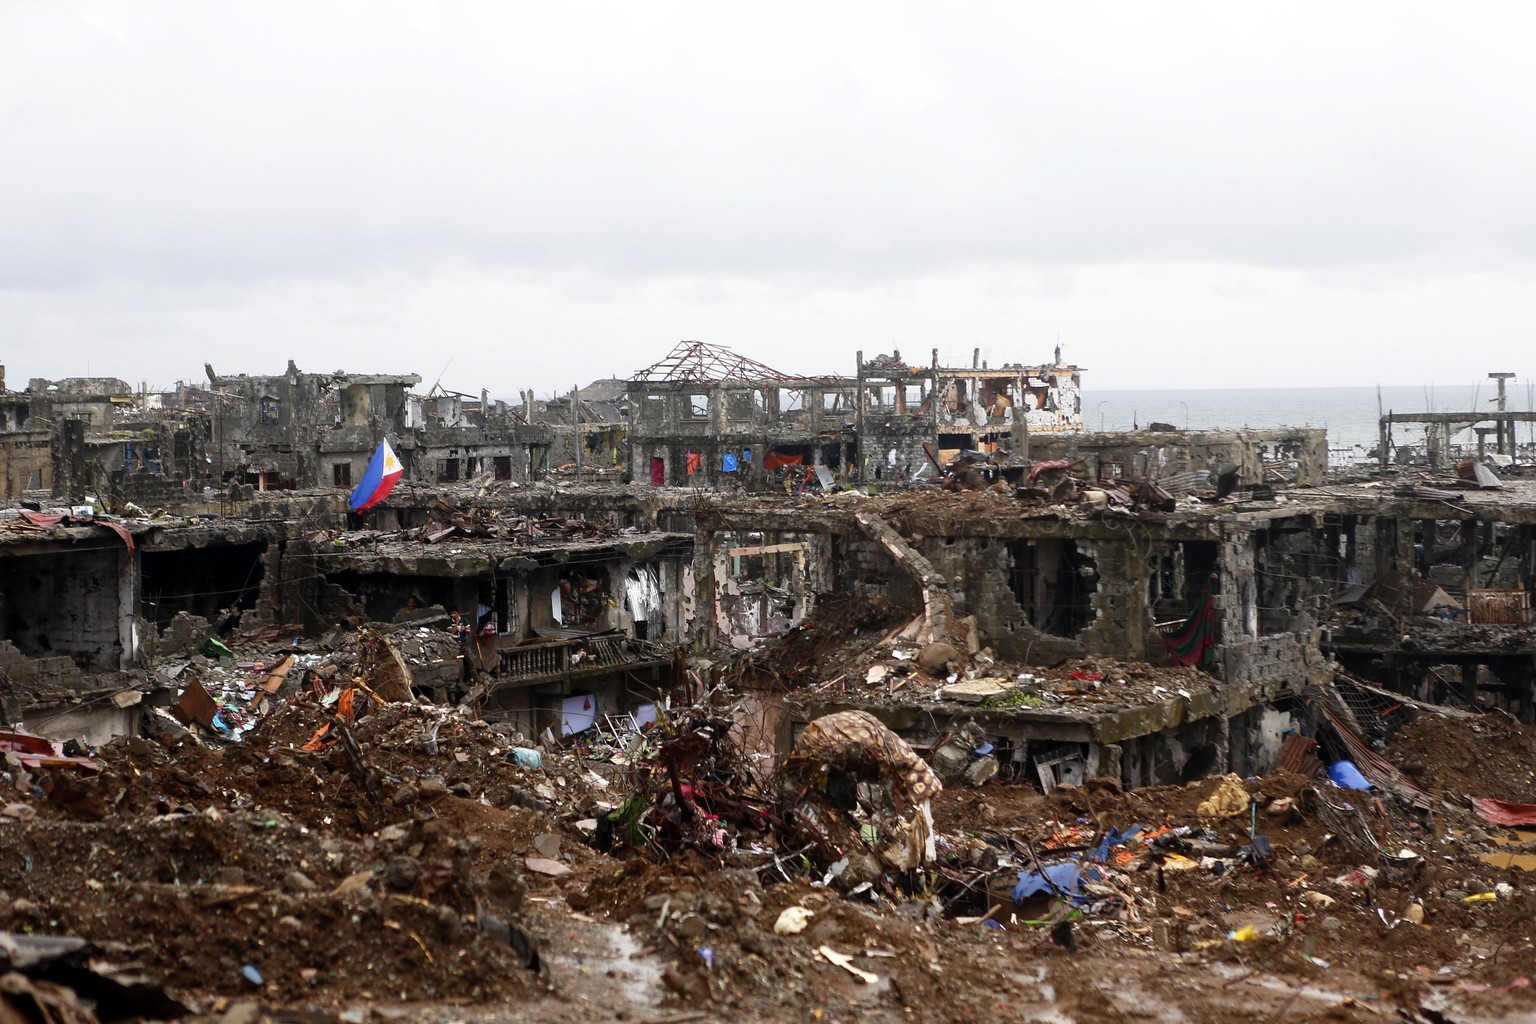 epa06270726 A view of the ruined city of Marawi, southern Philippines, 17 October 2017. The President of the Philippines Rodrigo Duterte announced that the city of Marawi is liberated after five month ...